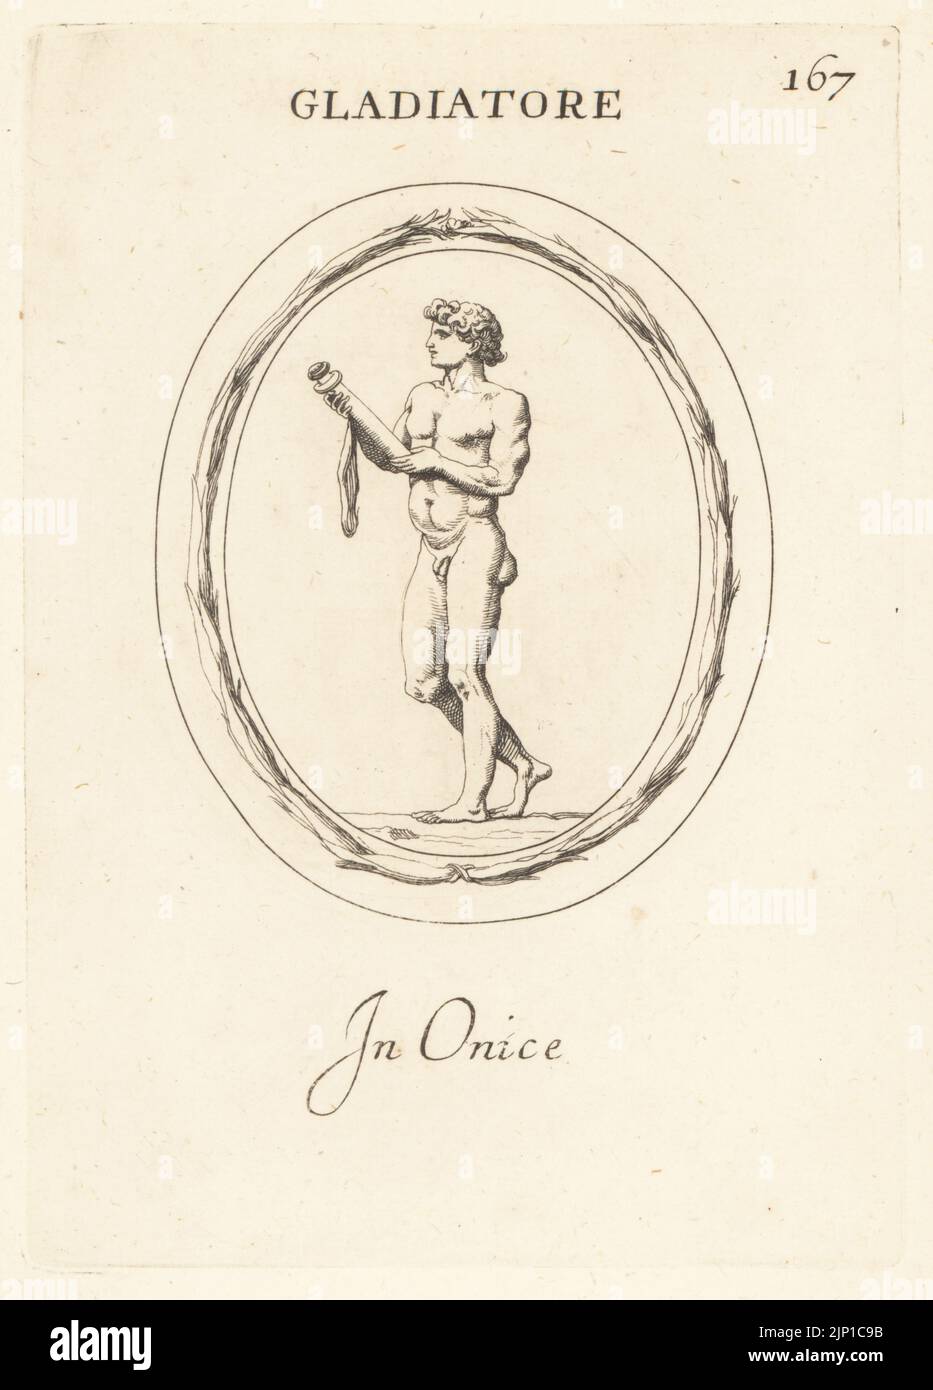 Naked Roman Rudiarius gladiator with wooden sword or rudis after earning his freedom, In onyx. Gladiatore. In onice. Copperplate engraving by Giovanni Battista Galestruzzi after Leonardo Agostini from Gemmae et Sculpturae Antiquae Depicti ab Leonardo Augustino Senesi, Abraham Blooteling, Amsterdam, 1685. Stock Photo